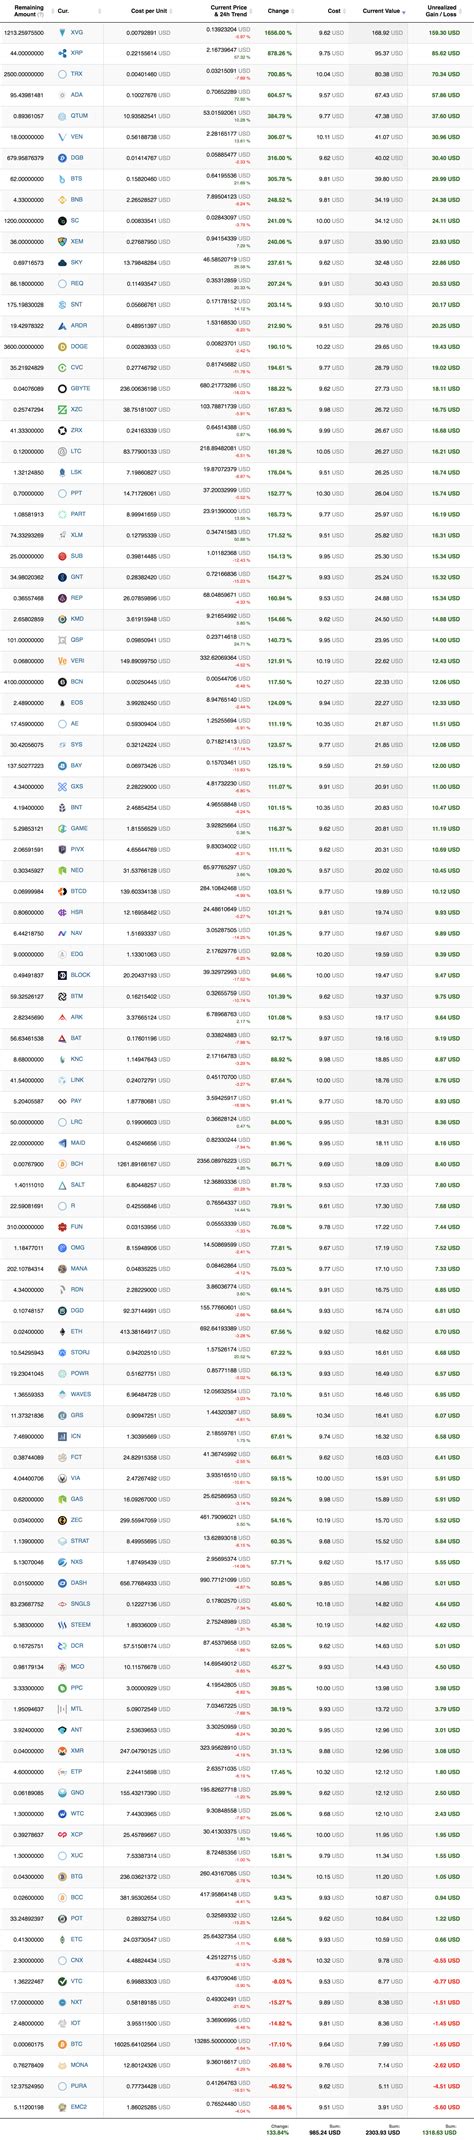 DAY 22 TOP 100 USD | Buy and Hold 100 Crypto